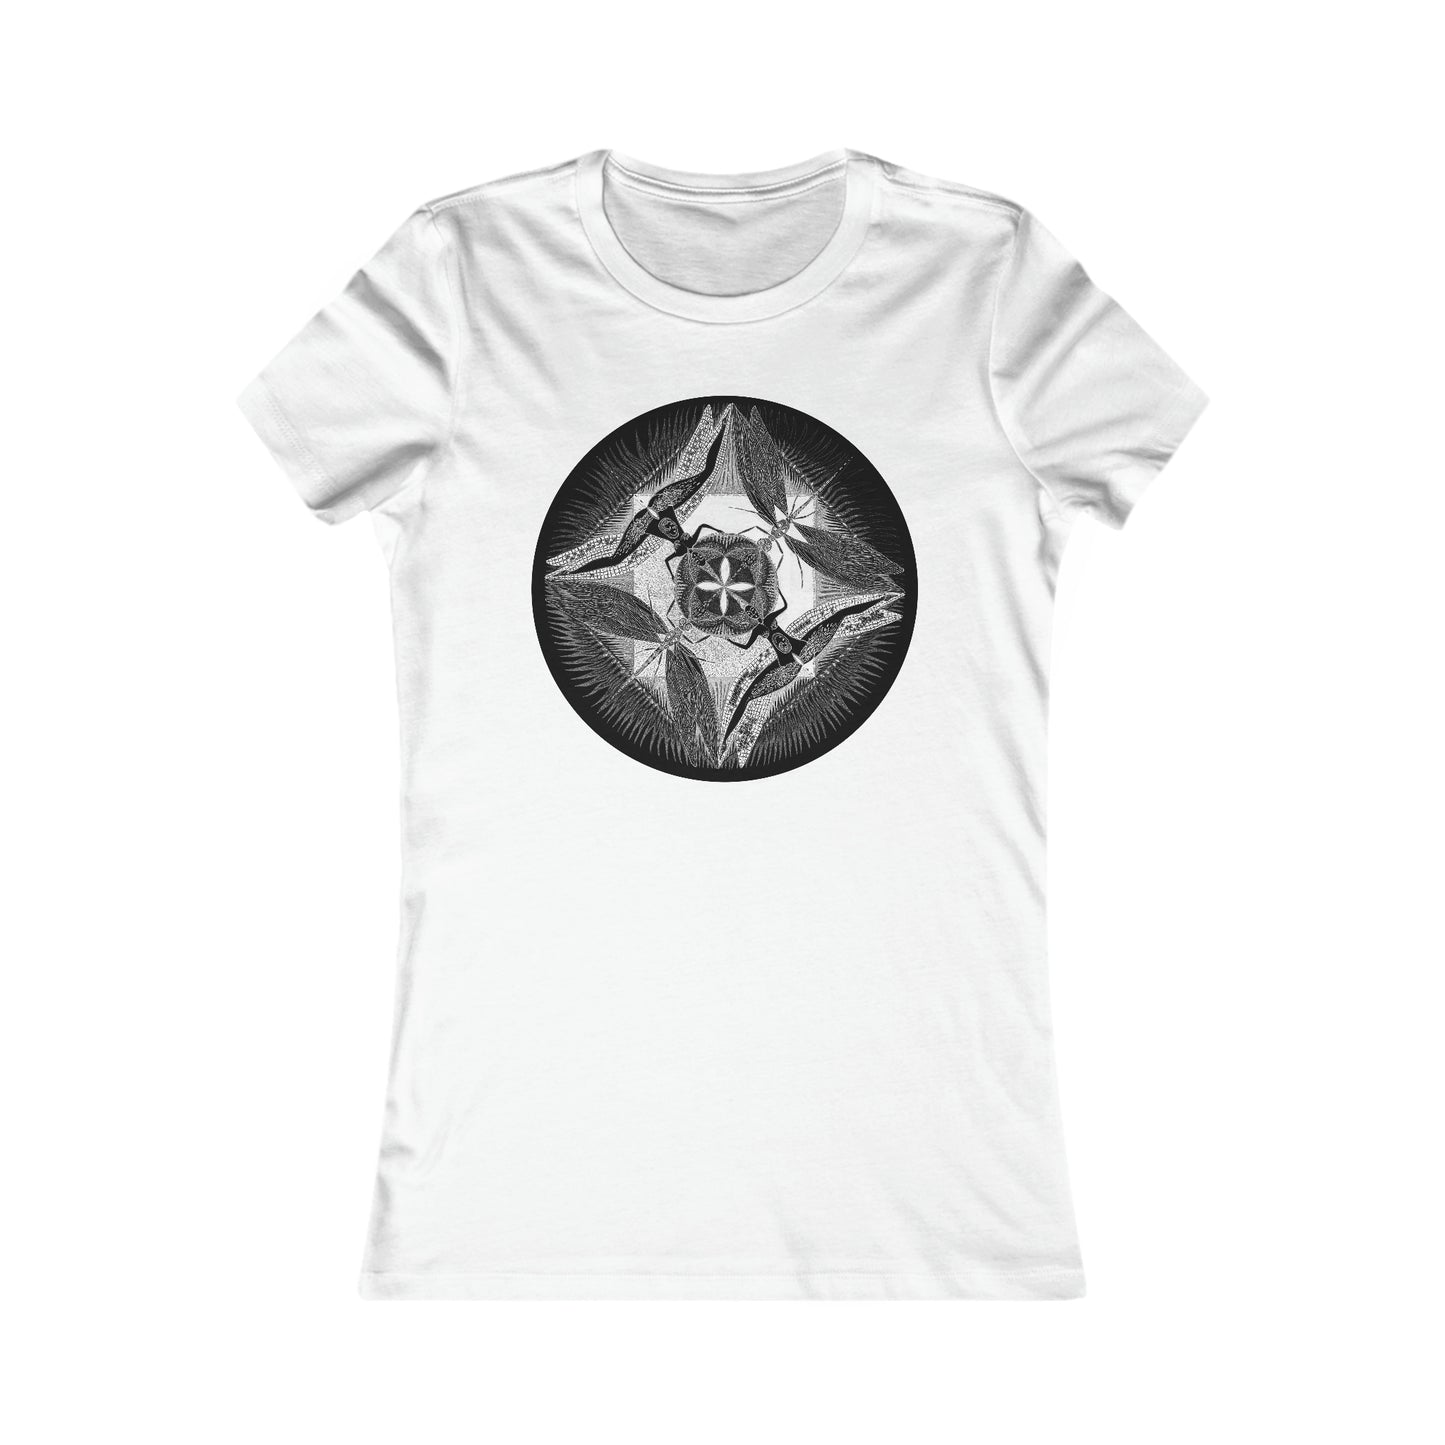 Women's Special Edition "DragonFly" Slim Fit Black&White Colors Tee